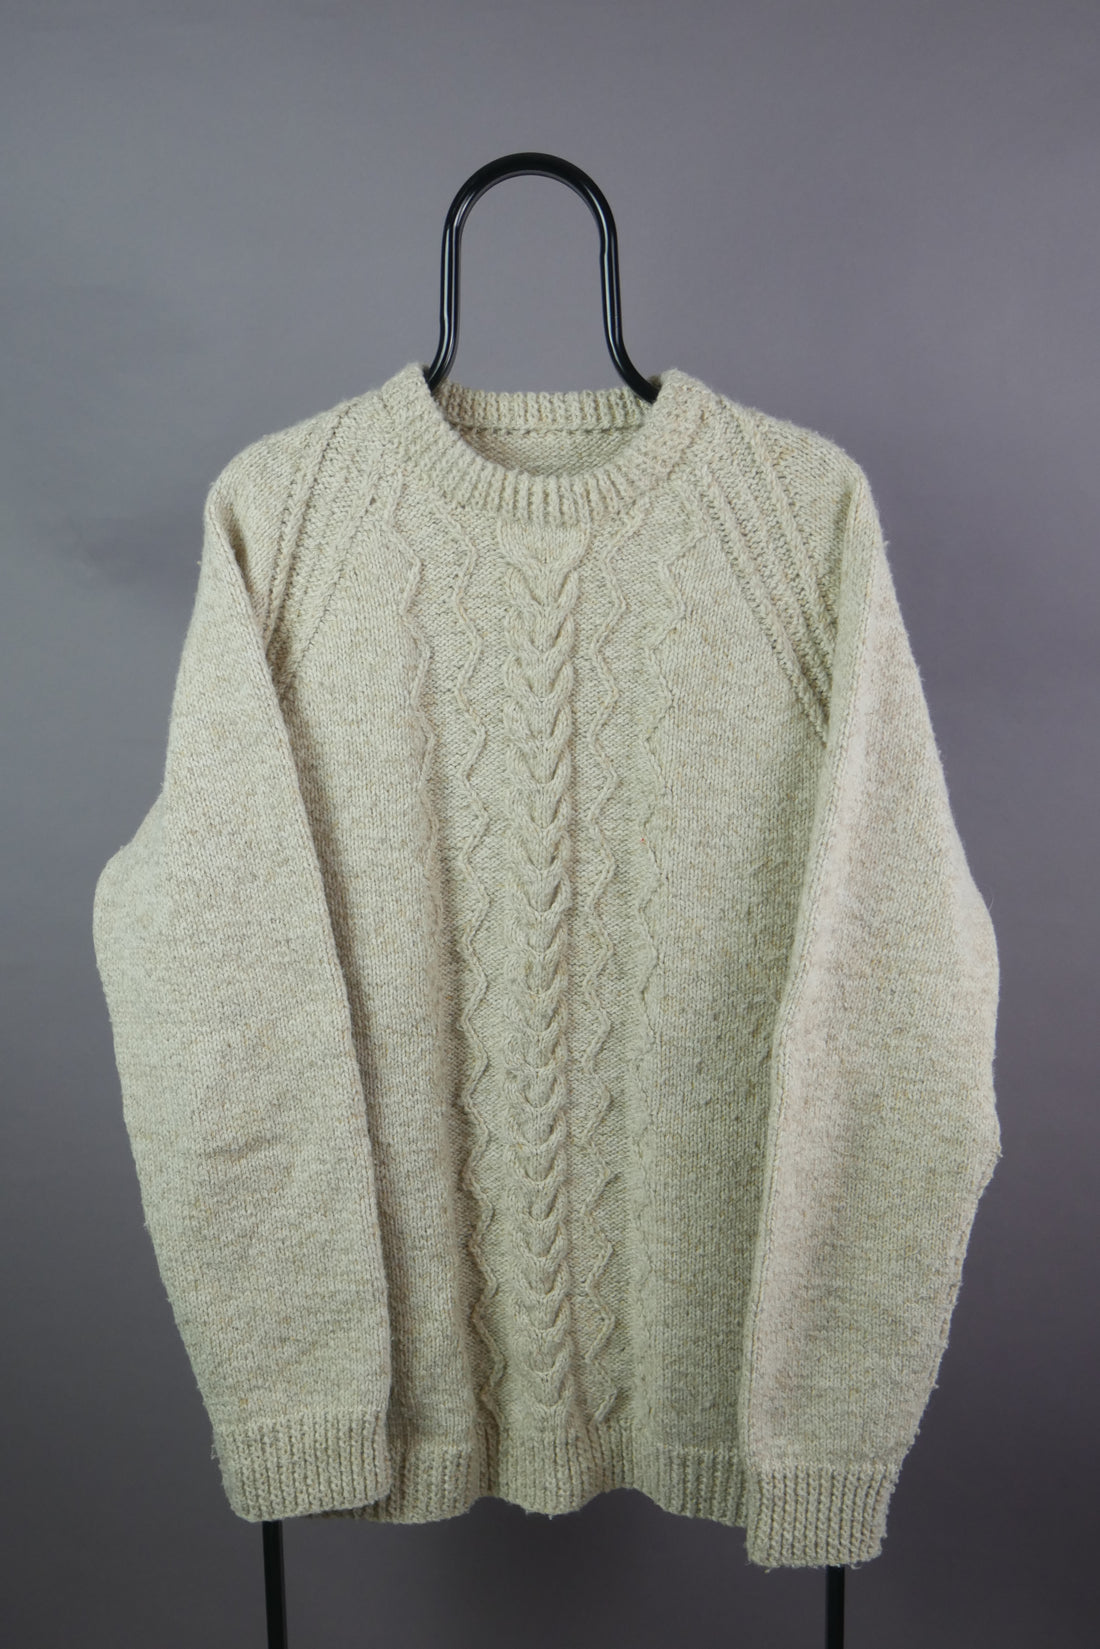 The Vintage Handknit Heavyweight Cable Knit Jumper (XL)